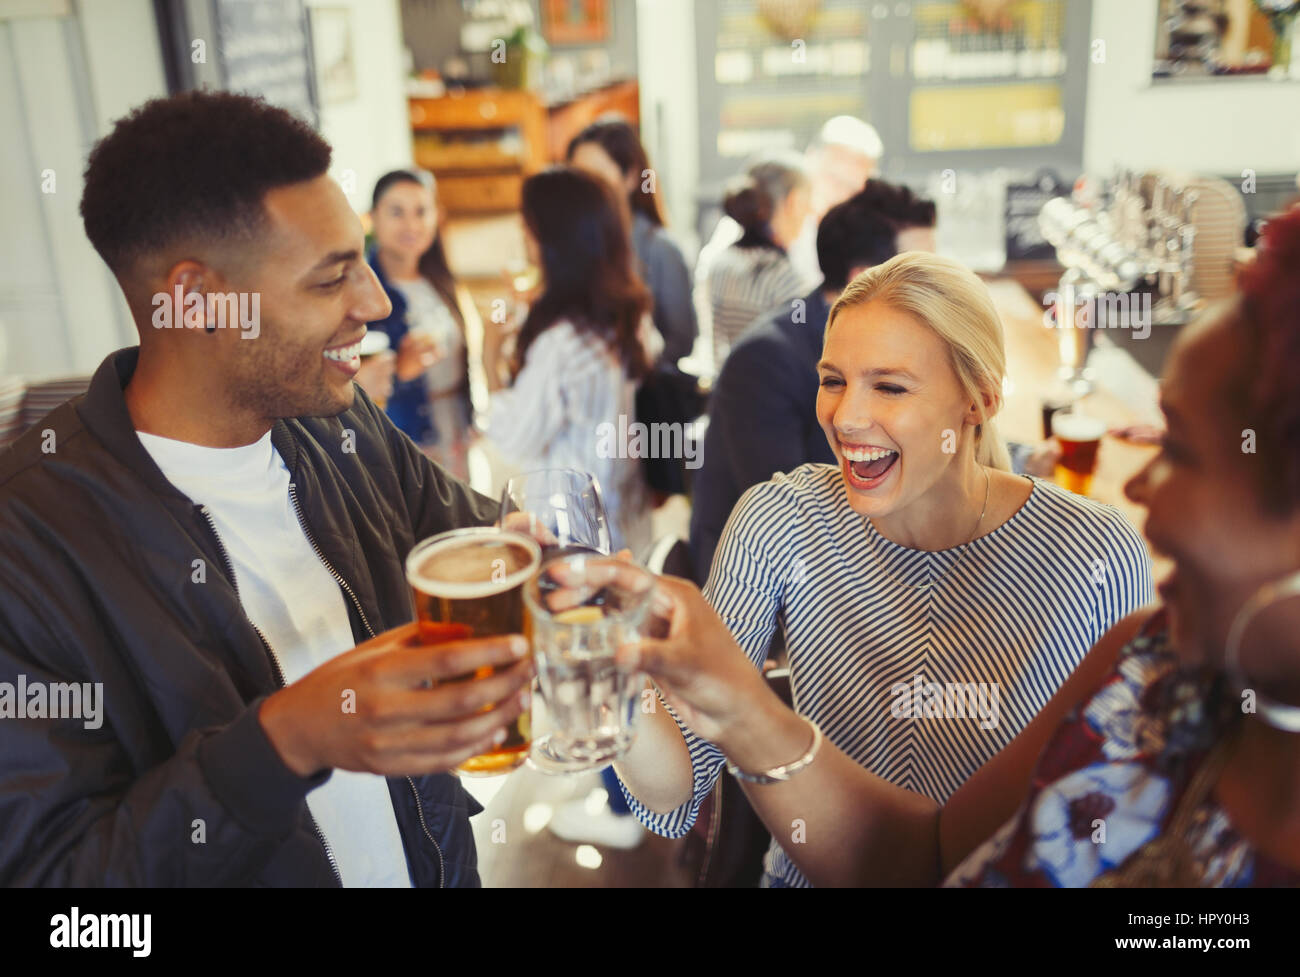 Laughing friends toasting beer and wine glasses at bar Stock Photo